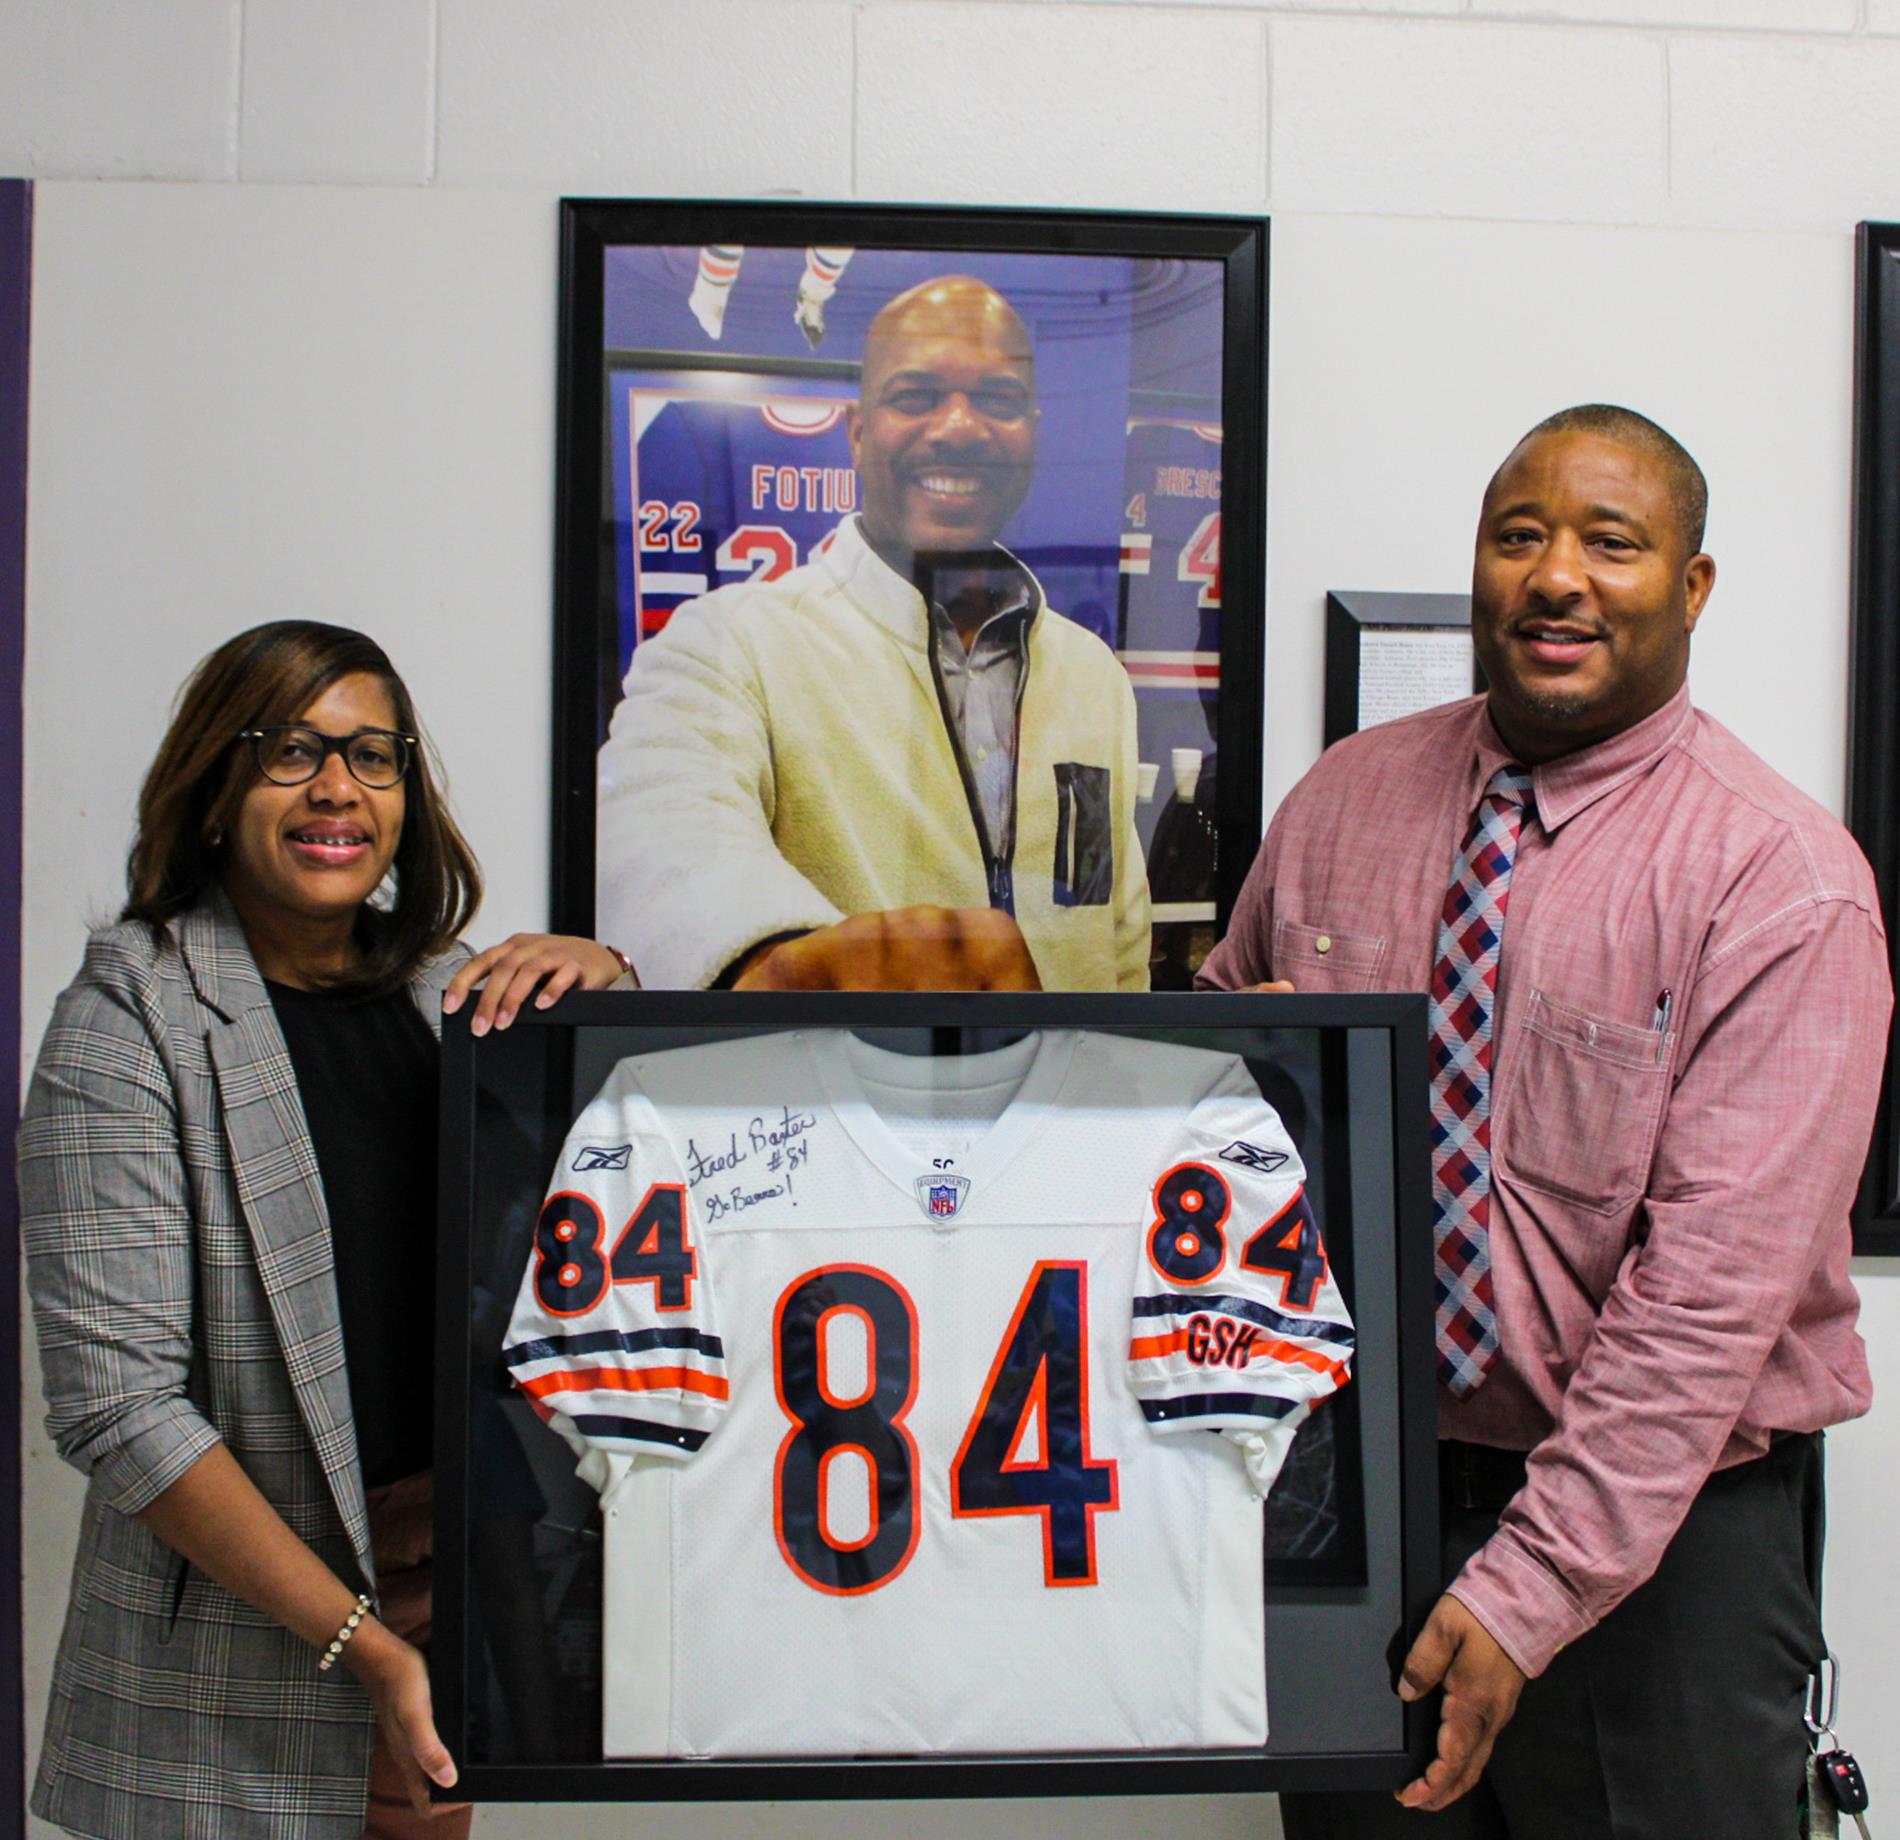 Fed Baxter jersey donated to PCES